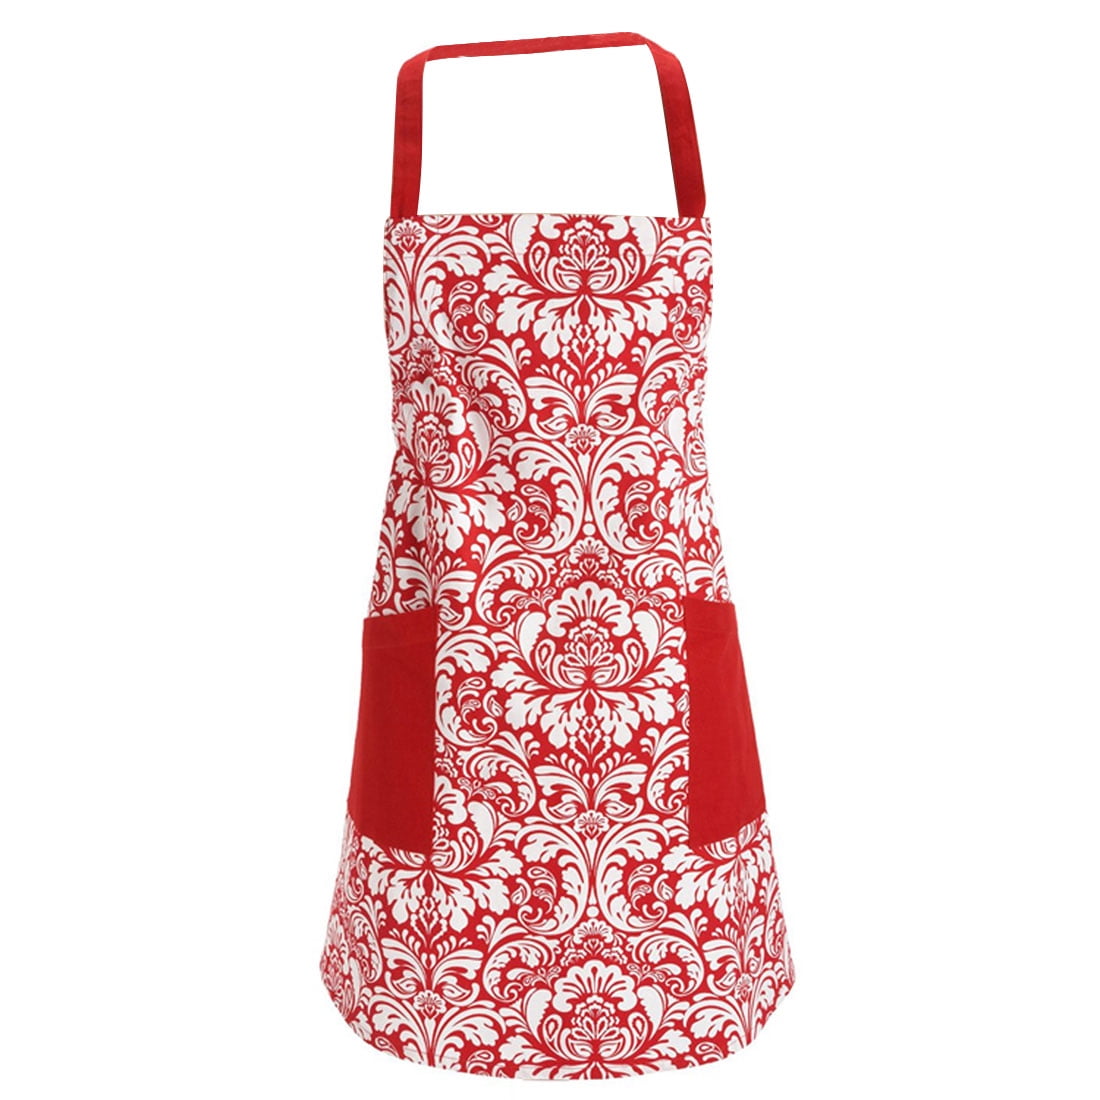 100 Cotton Machine Washable Kitchen Apron Cooking Apron Baking Apron With 2 Pockets Red 